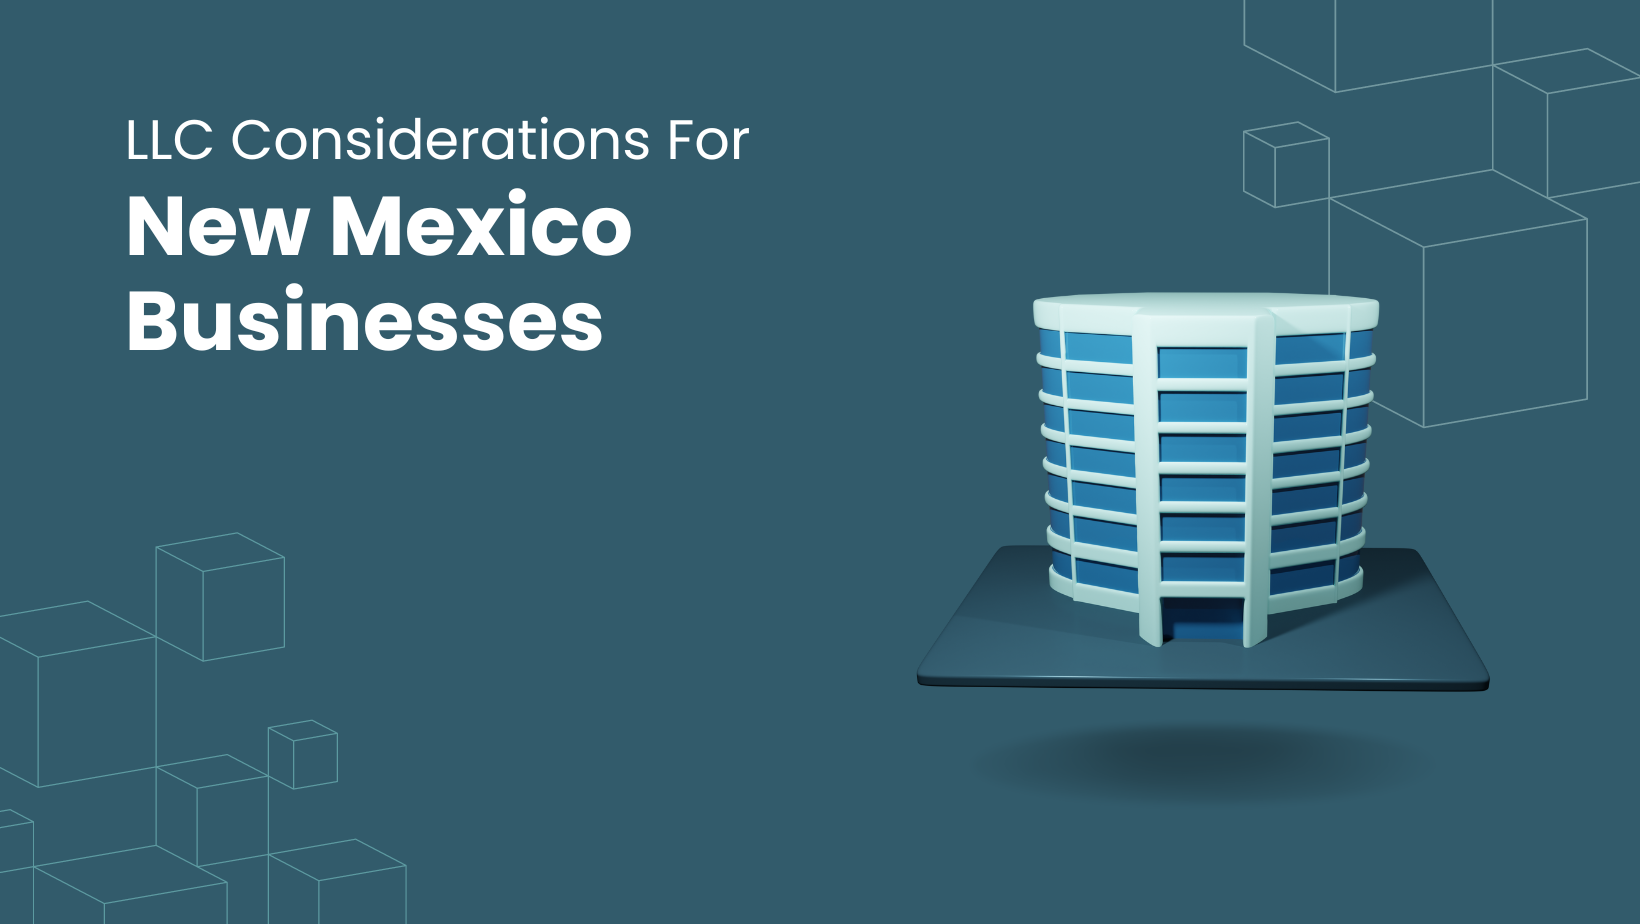 LLC Considerations For New Mexico Businesses